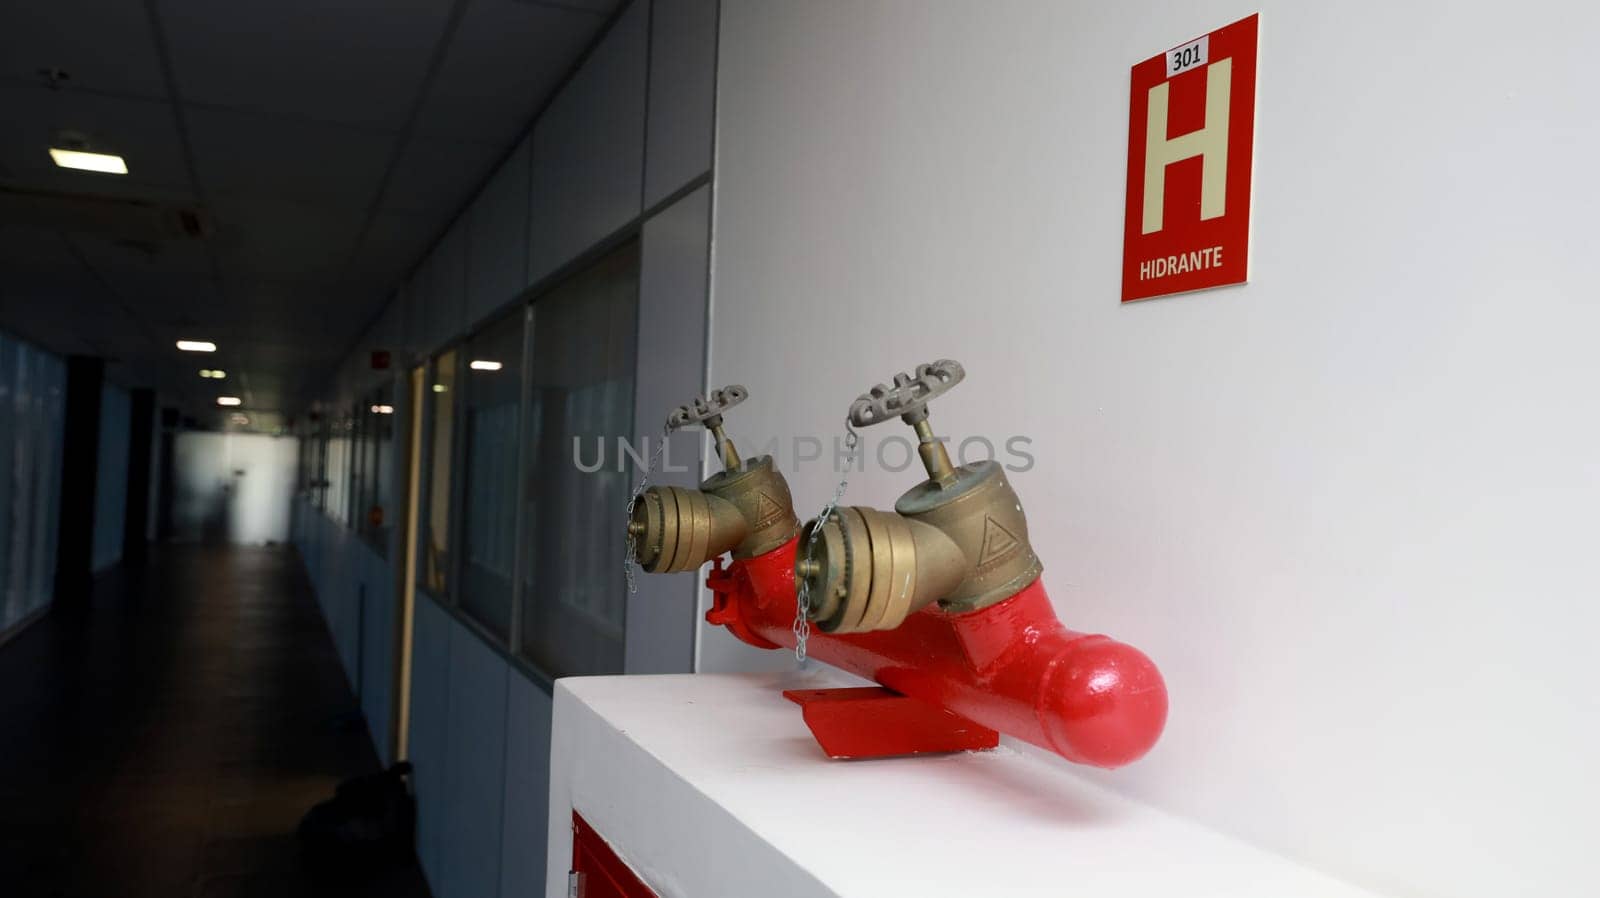 salvador, bahia, brazil - october 10, 2023: fire fighting hydrant seen in a commercial building in the city of Salvador